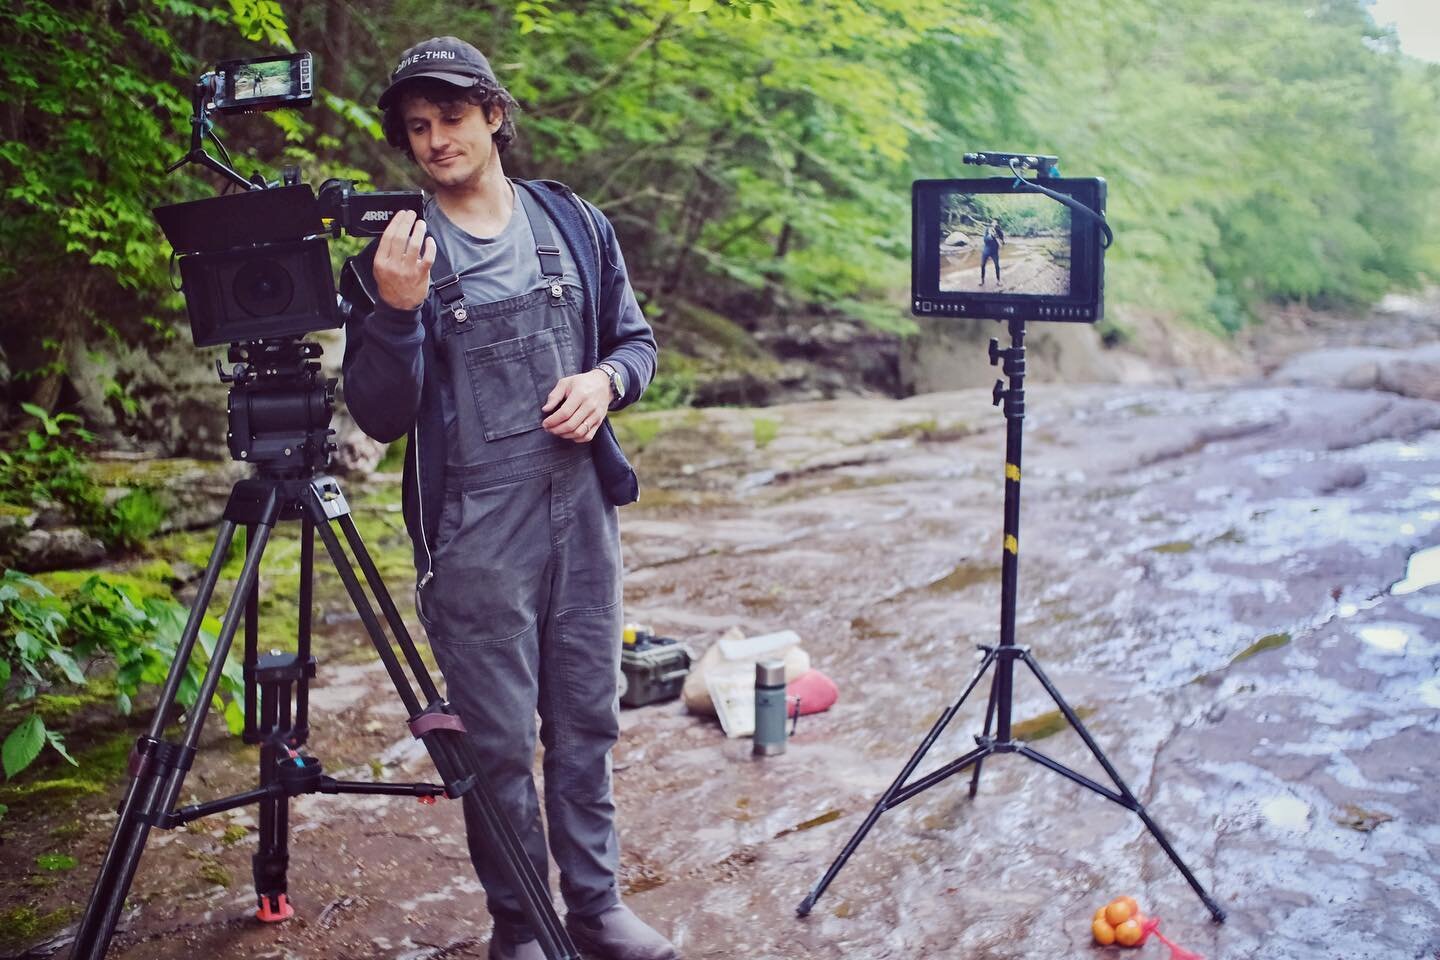 I&rsquo;m not a 1st AC, but I play one on TV. 
&hellip; soggy times with the Alexa 35